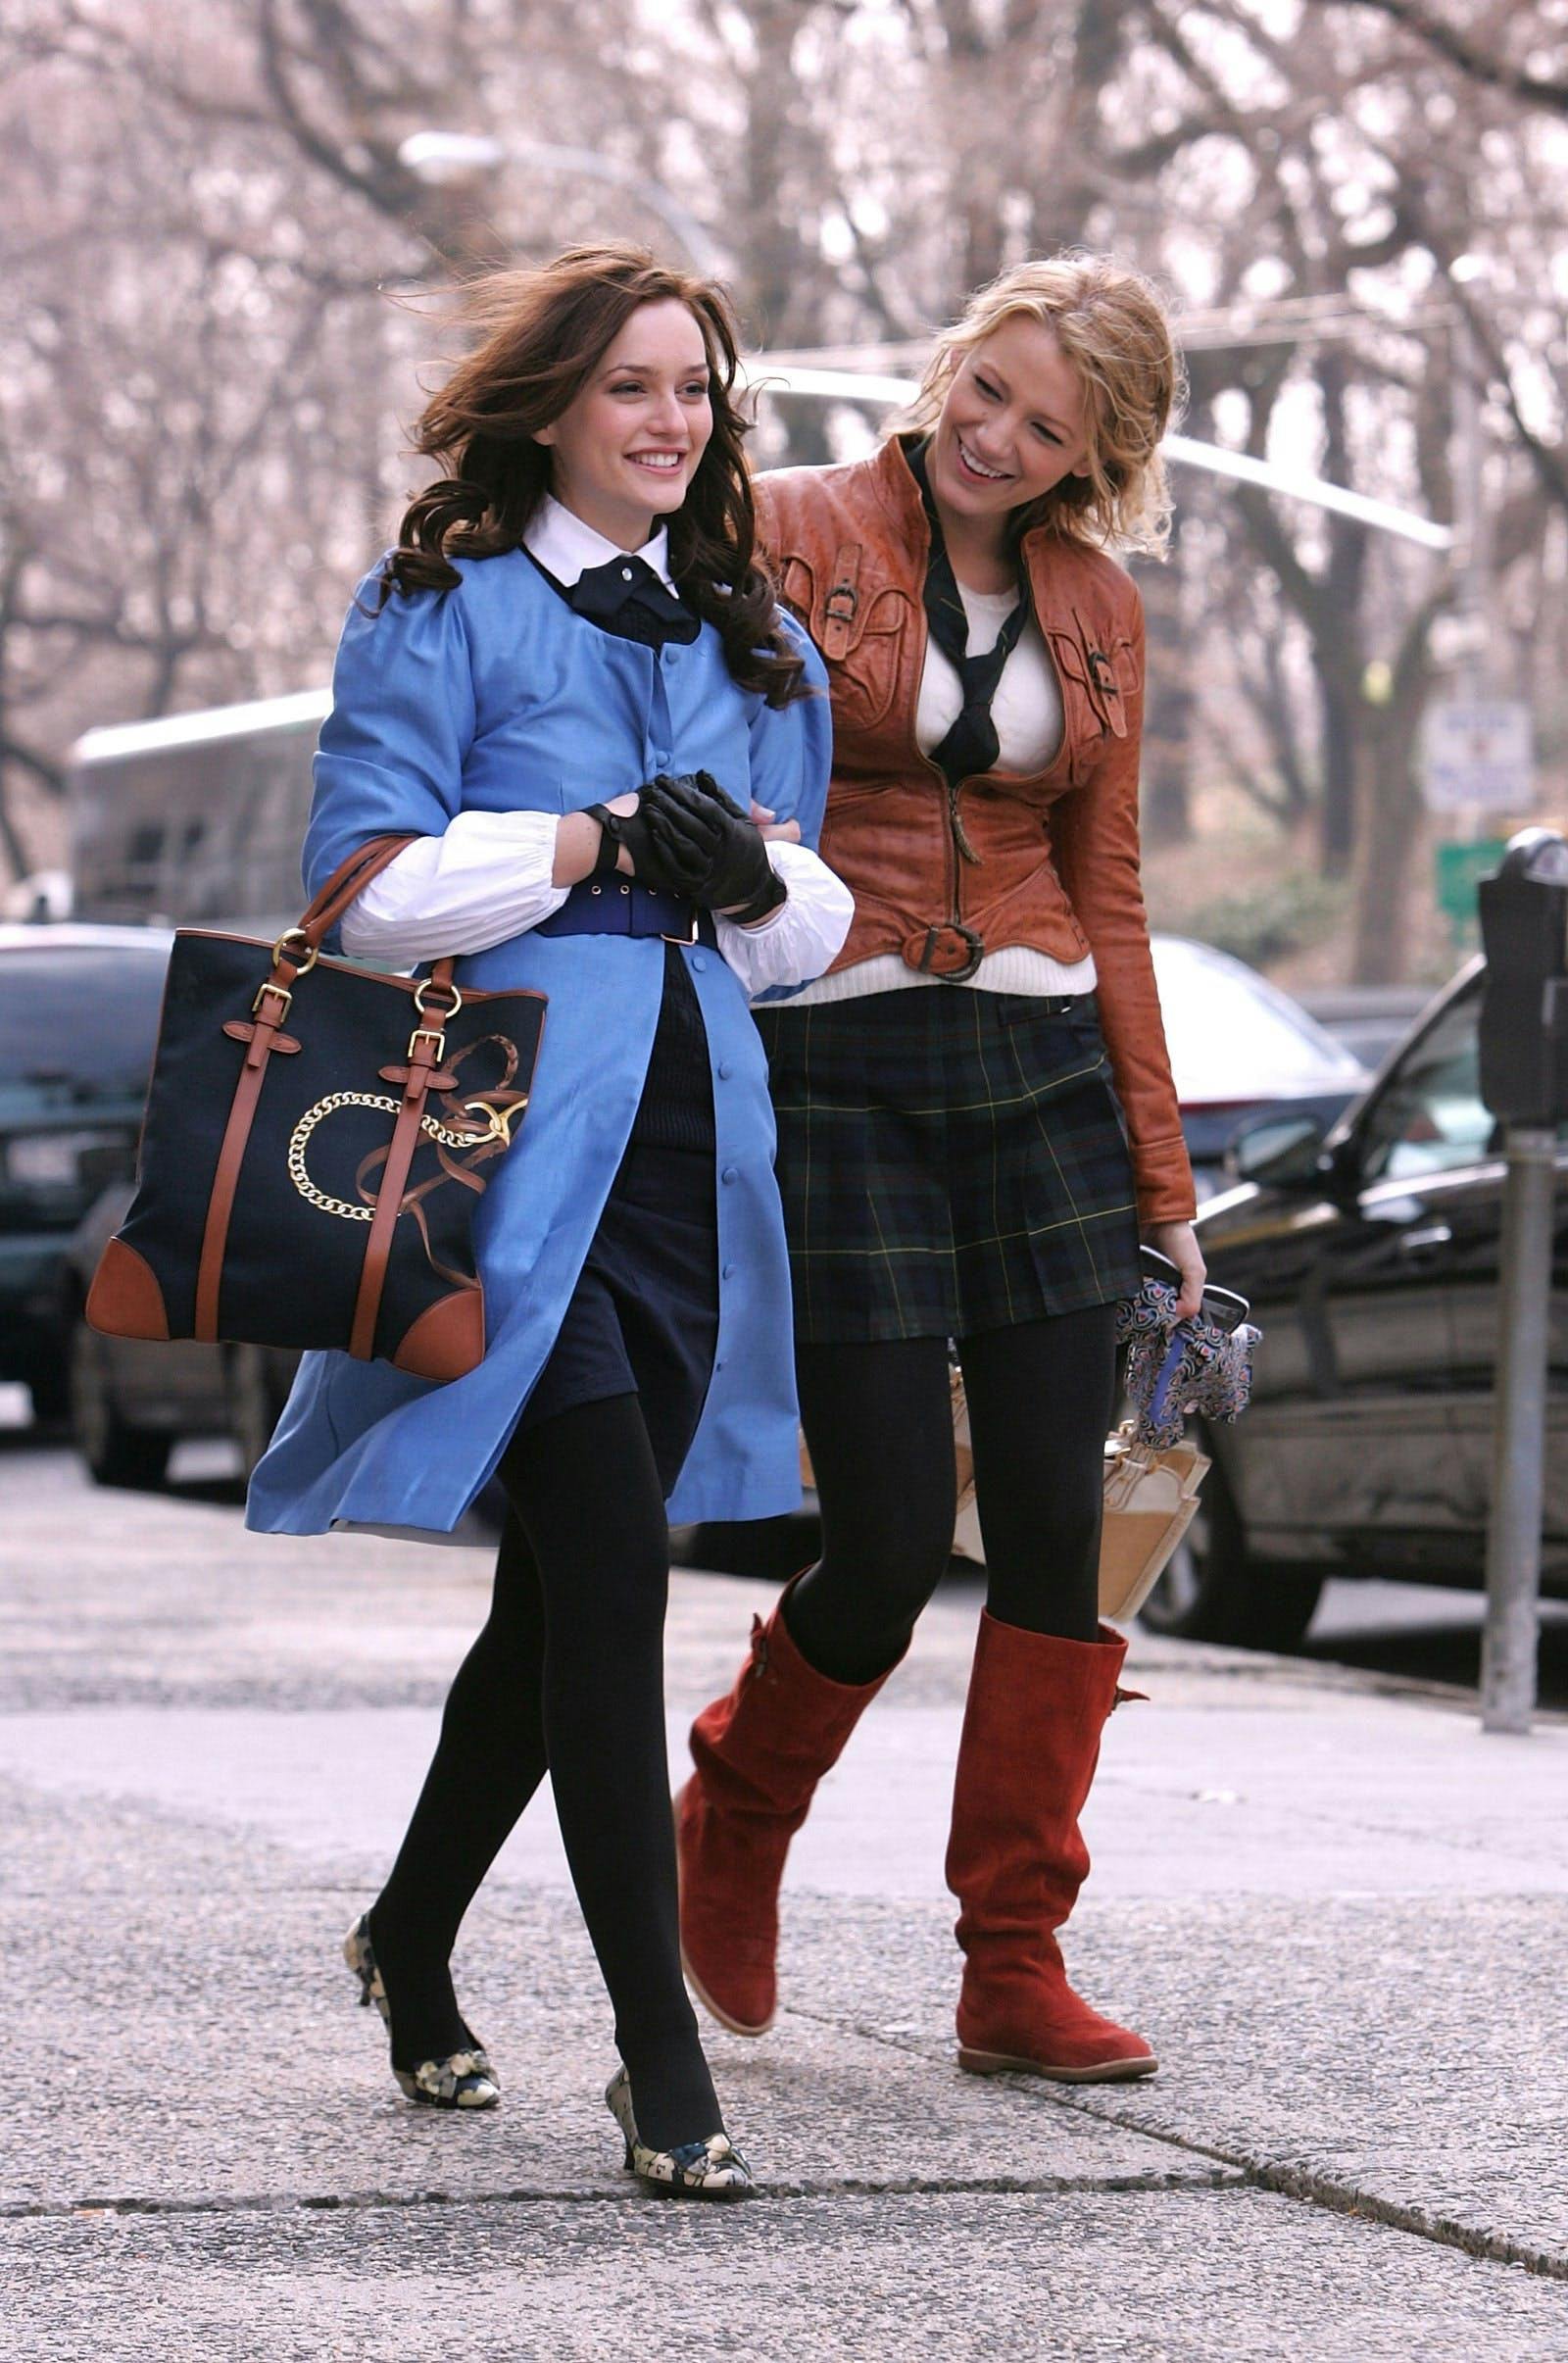 Woman in blue coat and black skirt with woman in brown coat and plaid skirt walking on the street.